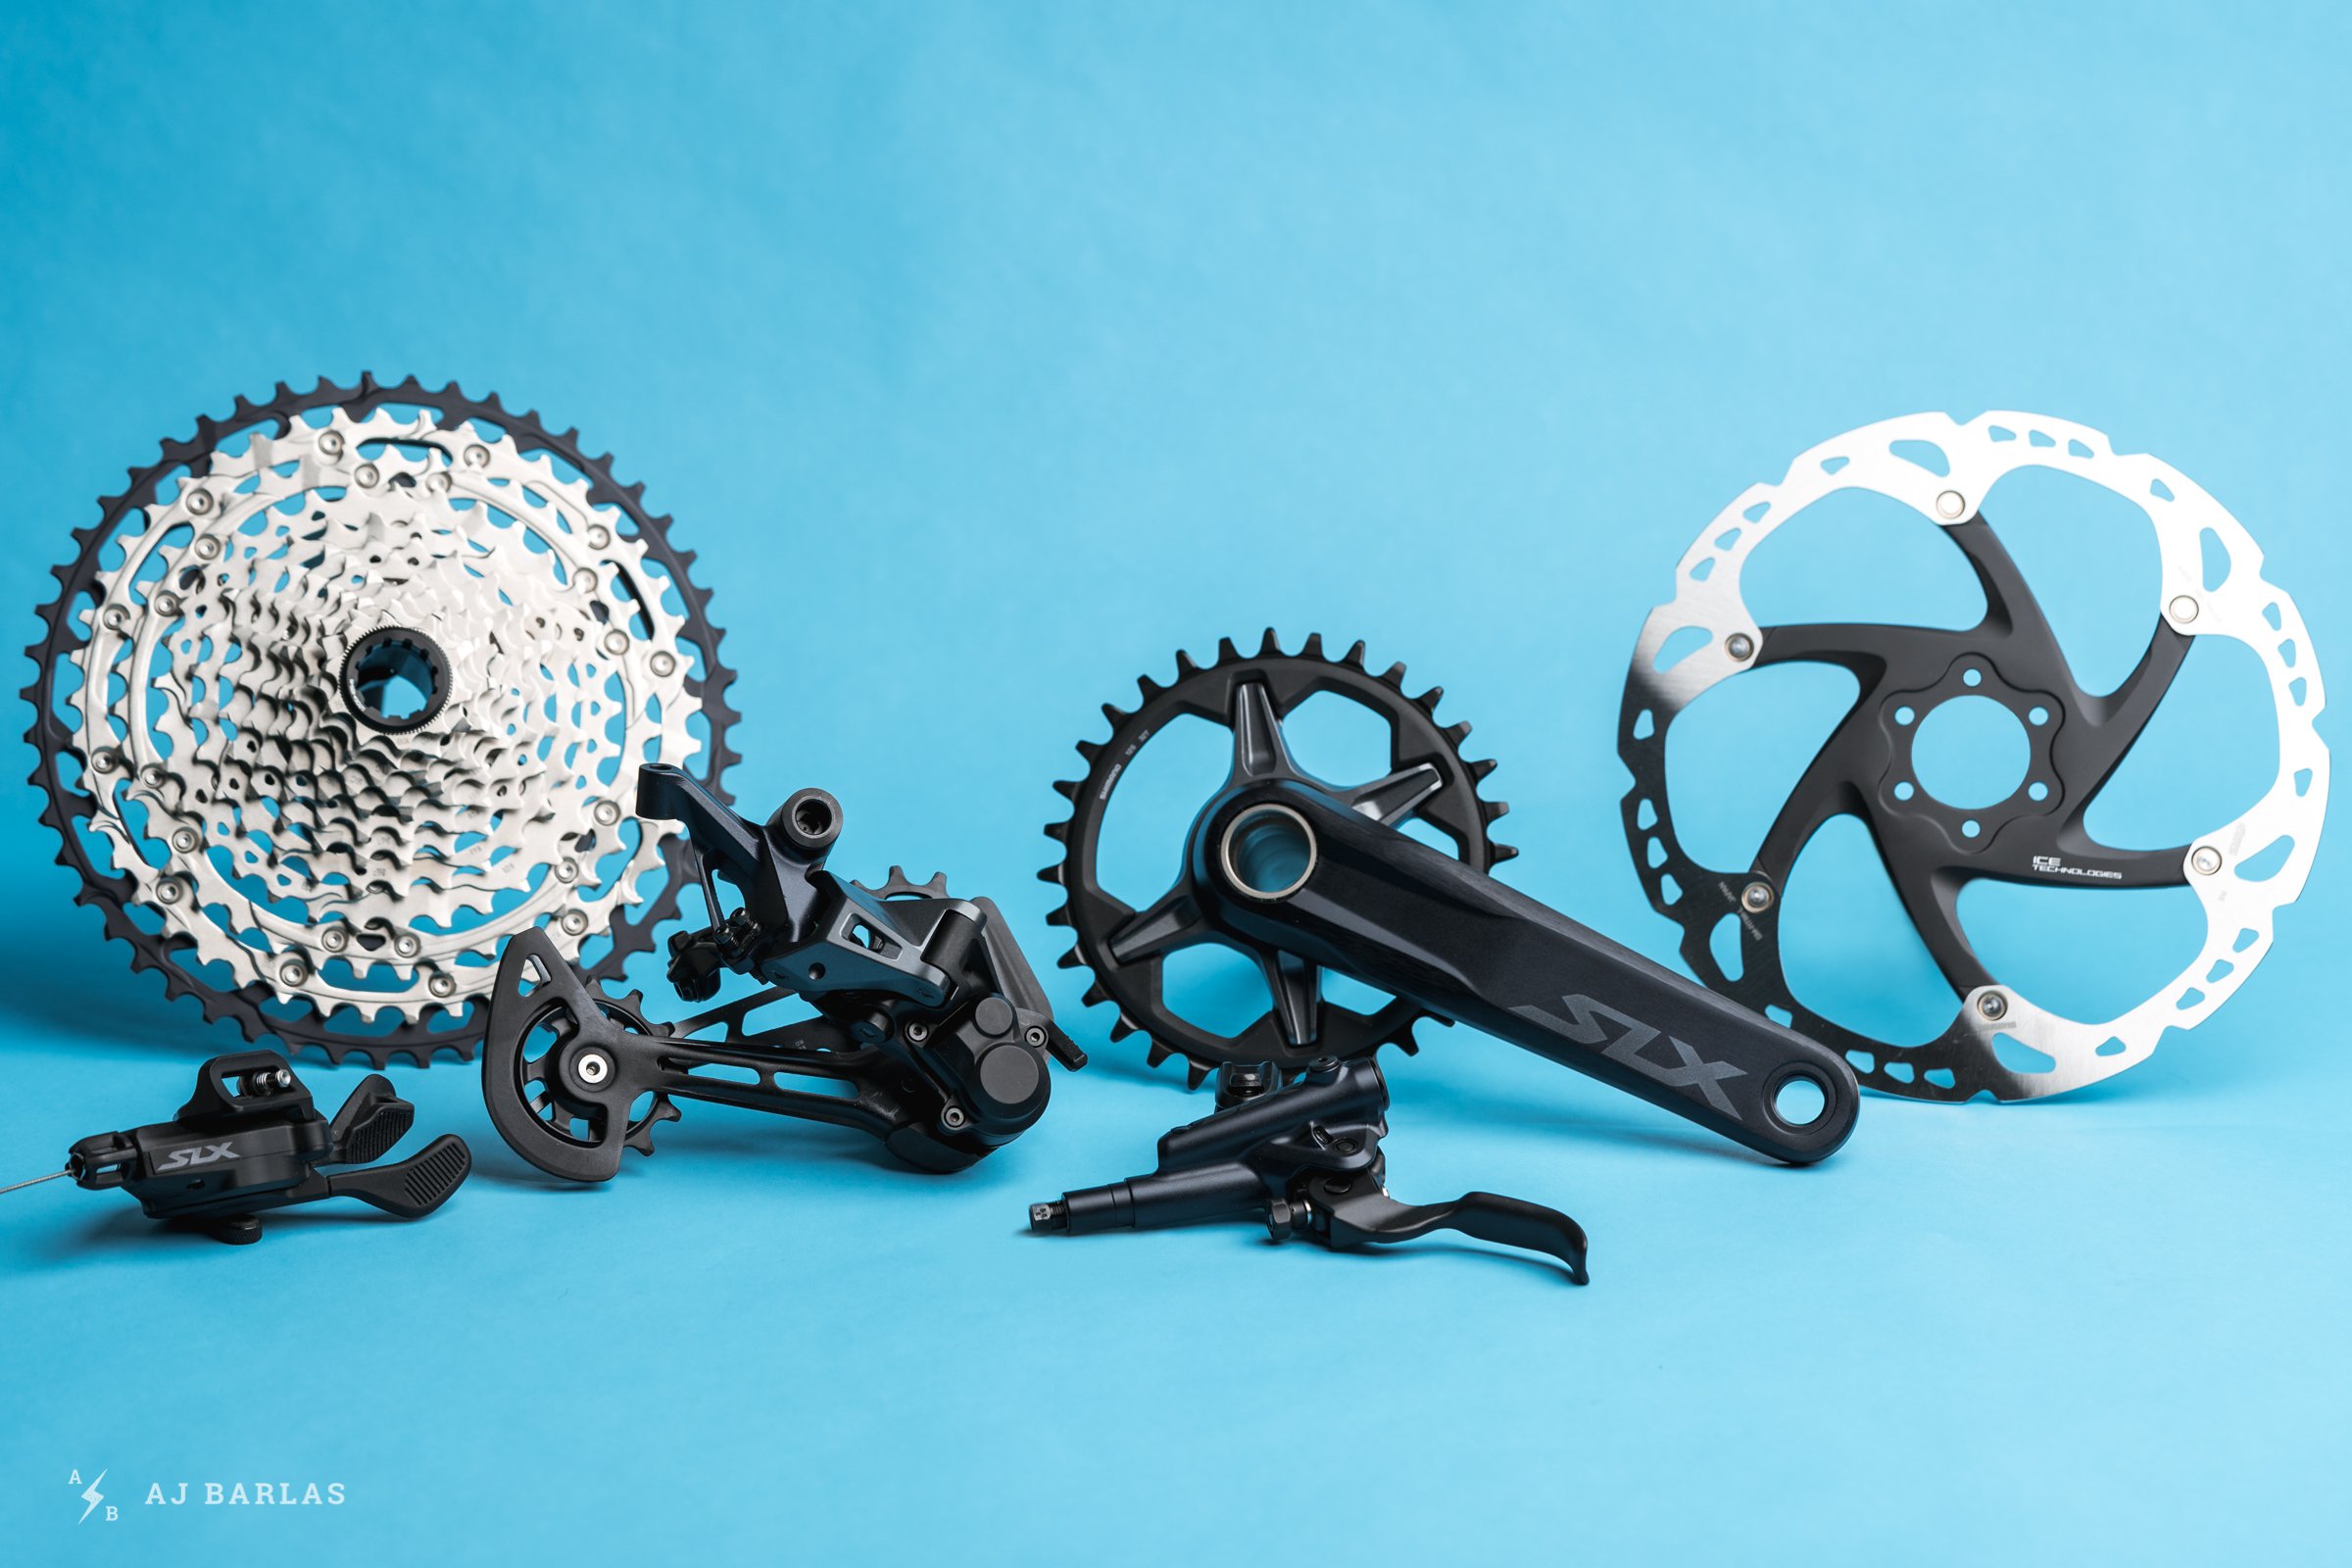 First Review: Shimano XT M8100 and SLX M7100 – presenting Shimano's  entry-level 12-speed drivetrains